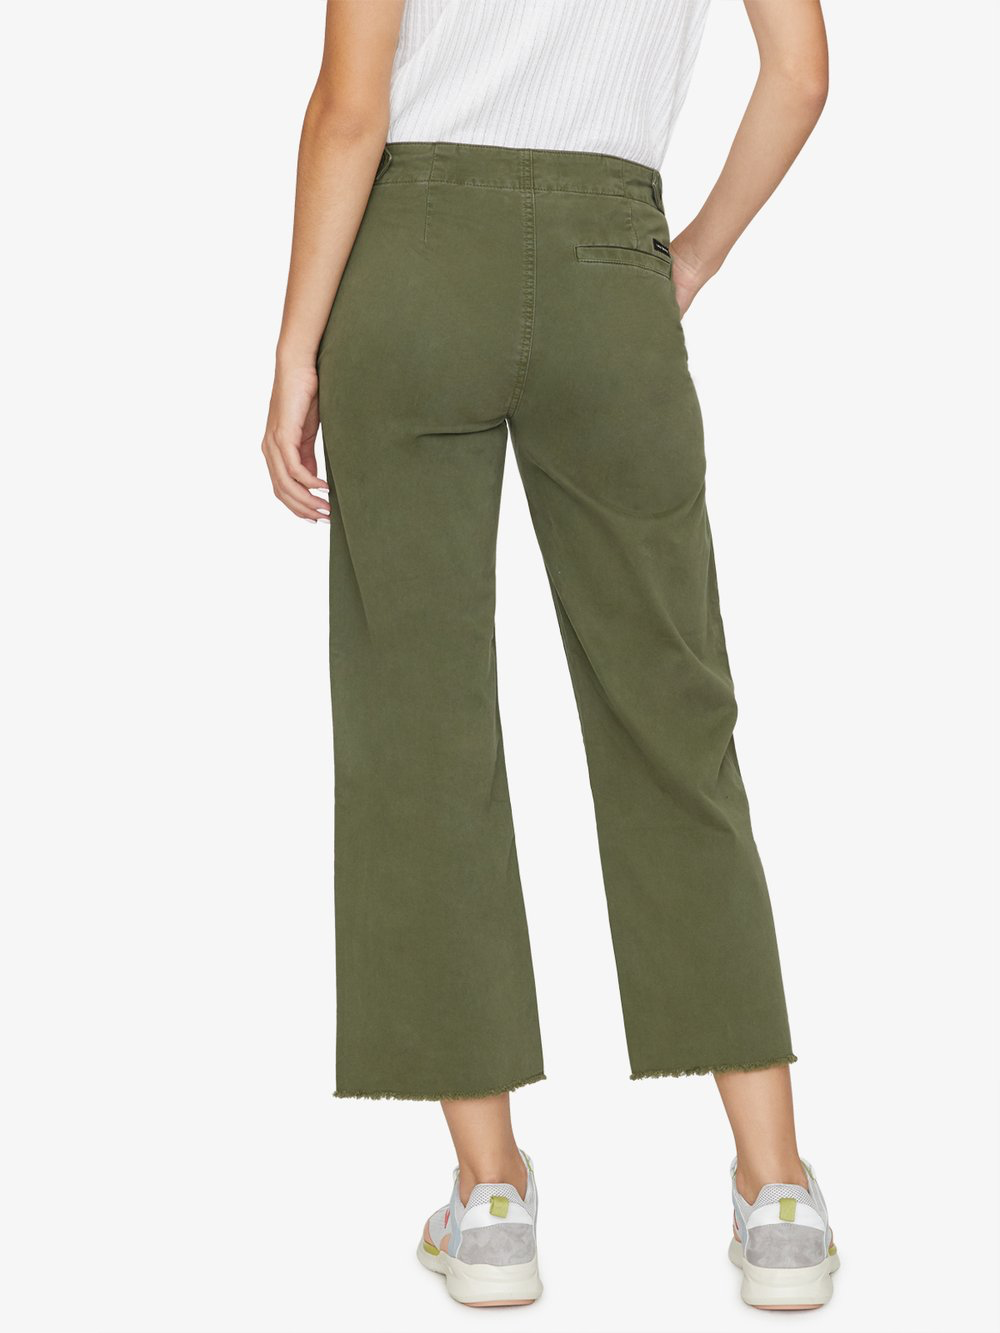 Skipper Chino Pant Light Aged Green - Kingfisher Road - Online Boutique